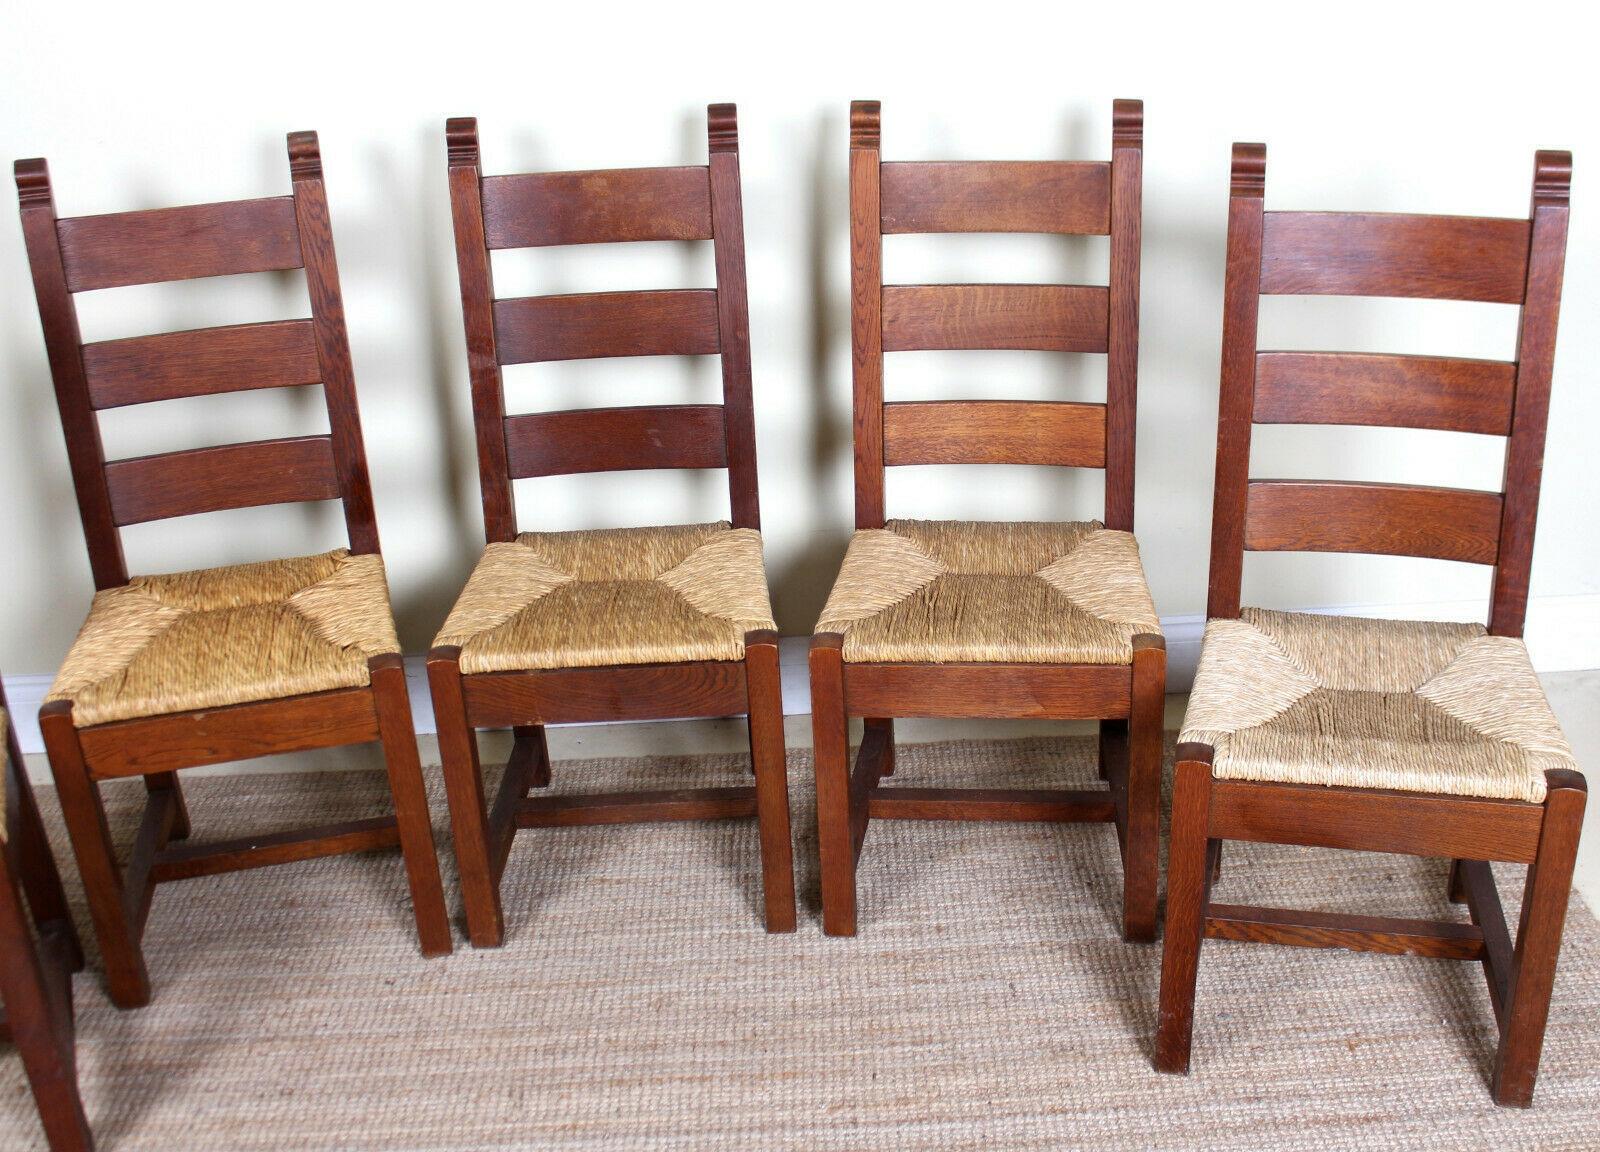 20th Century English Oak Dining Table and 5 Chairs Country Arts & Crafts Rustic Rush Country For Sale